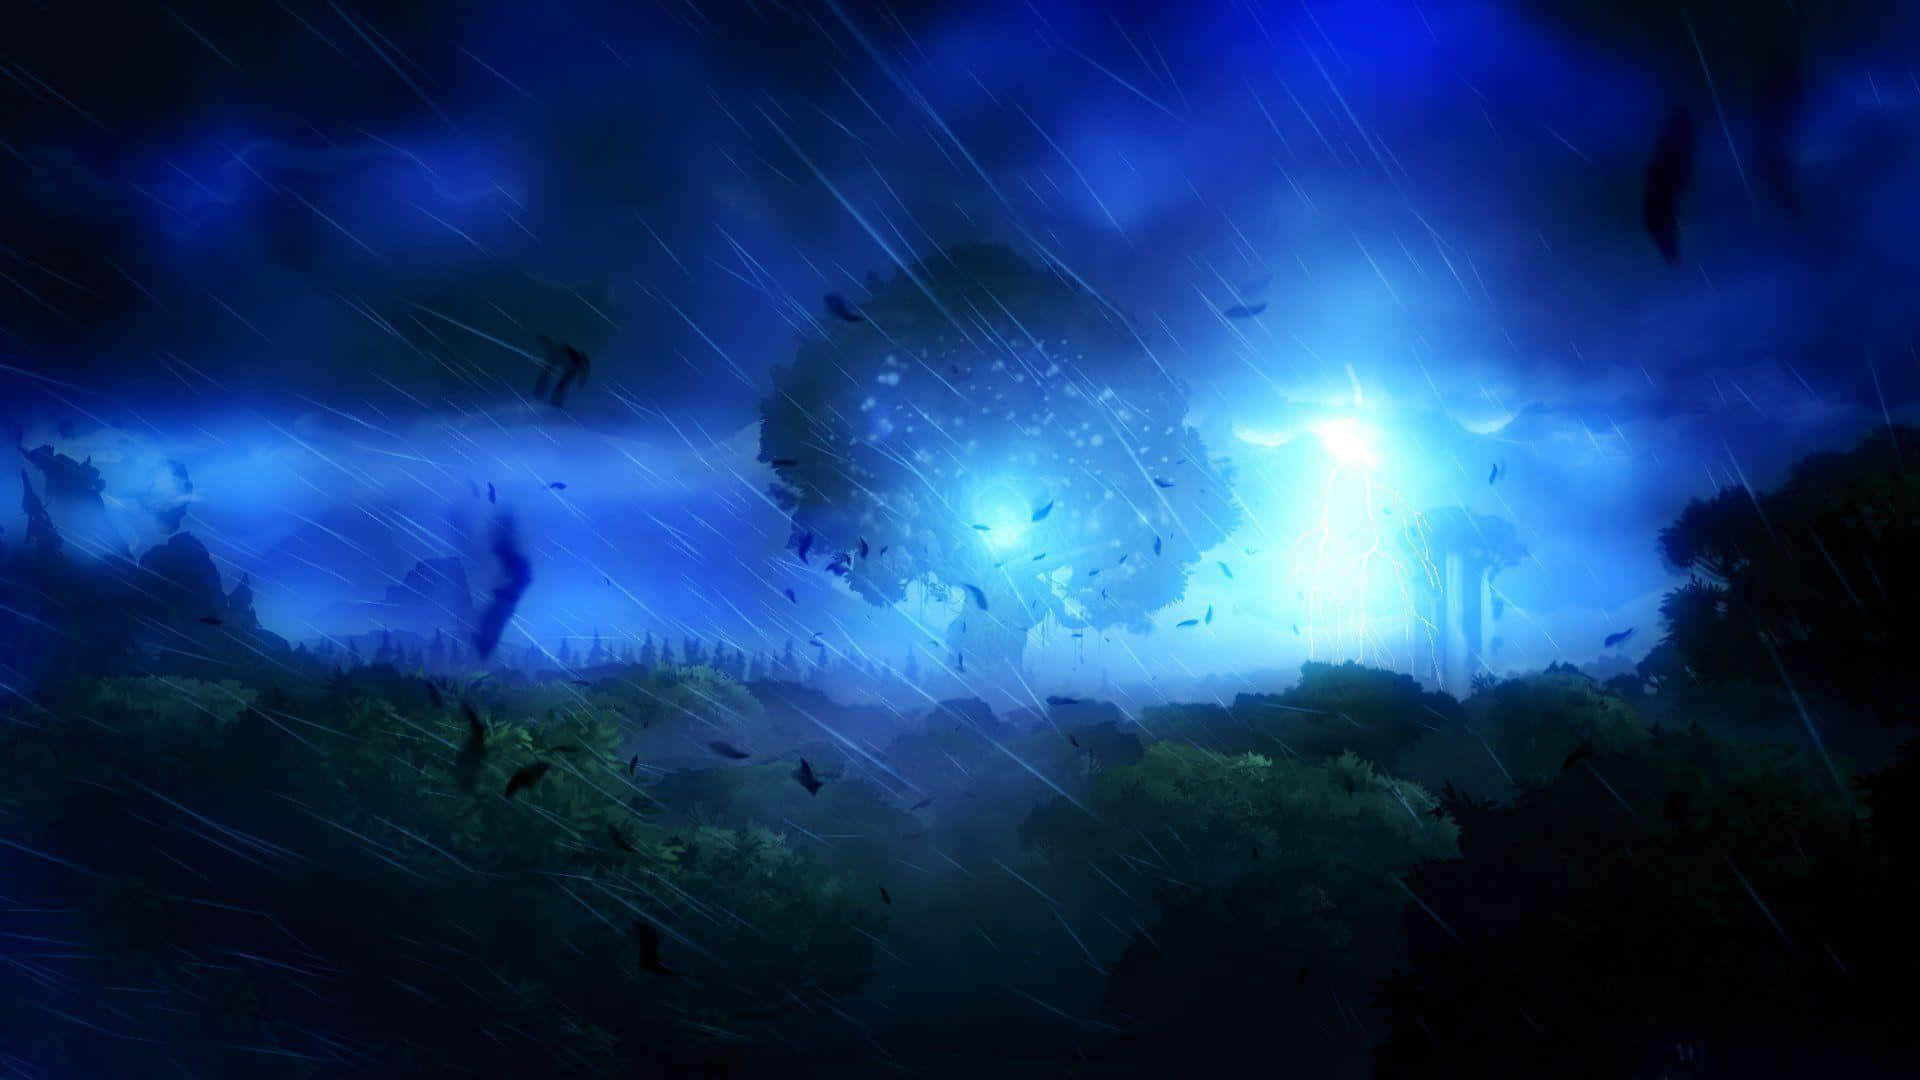 Cool Tree In The Blind Forest Wallpaper